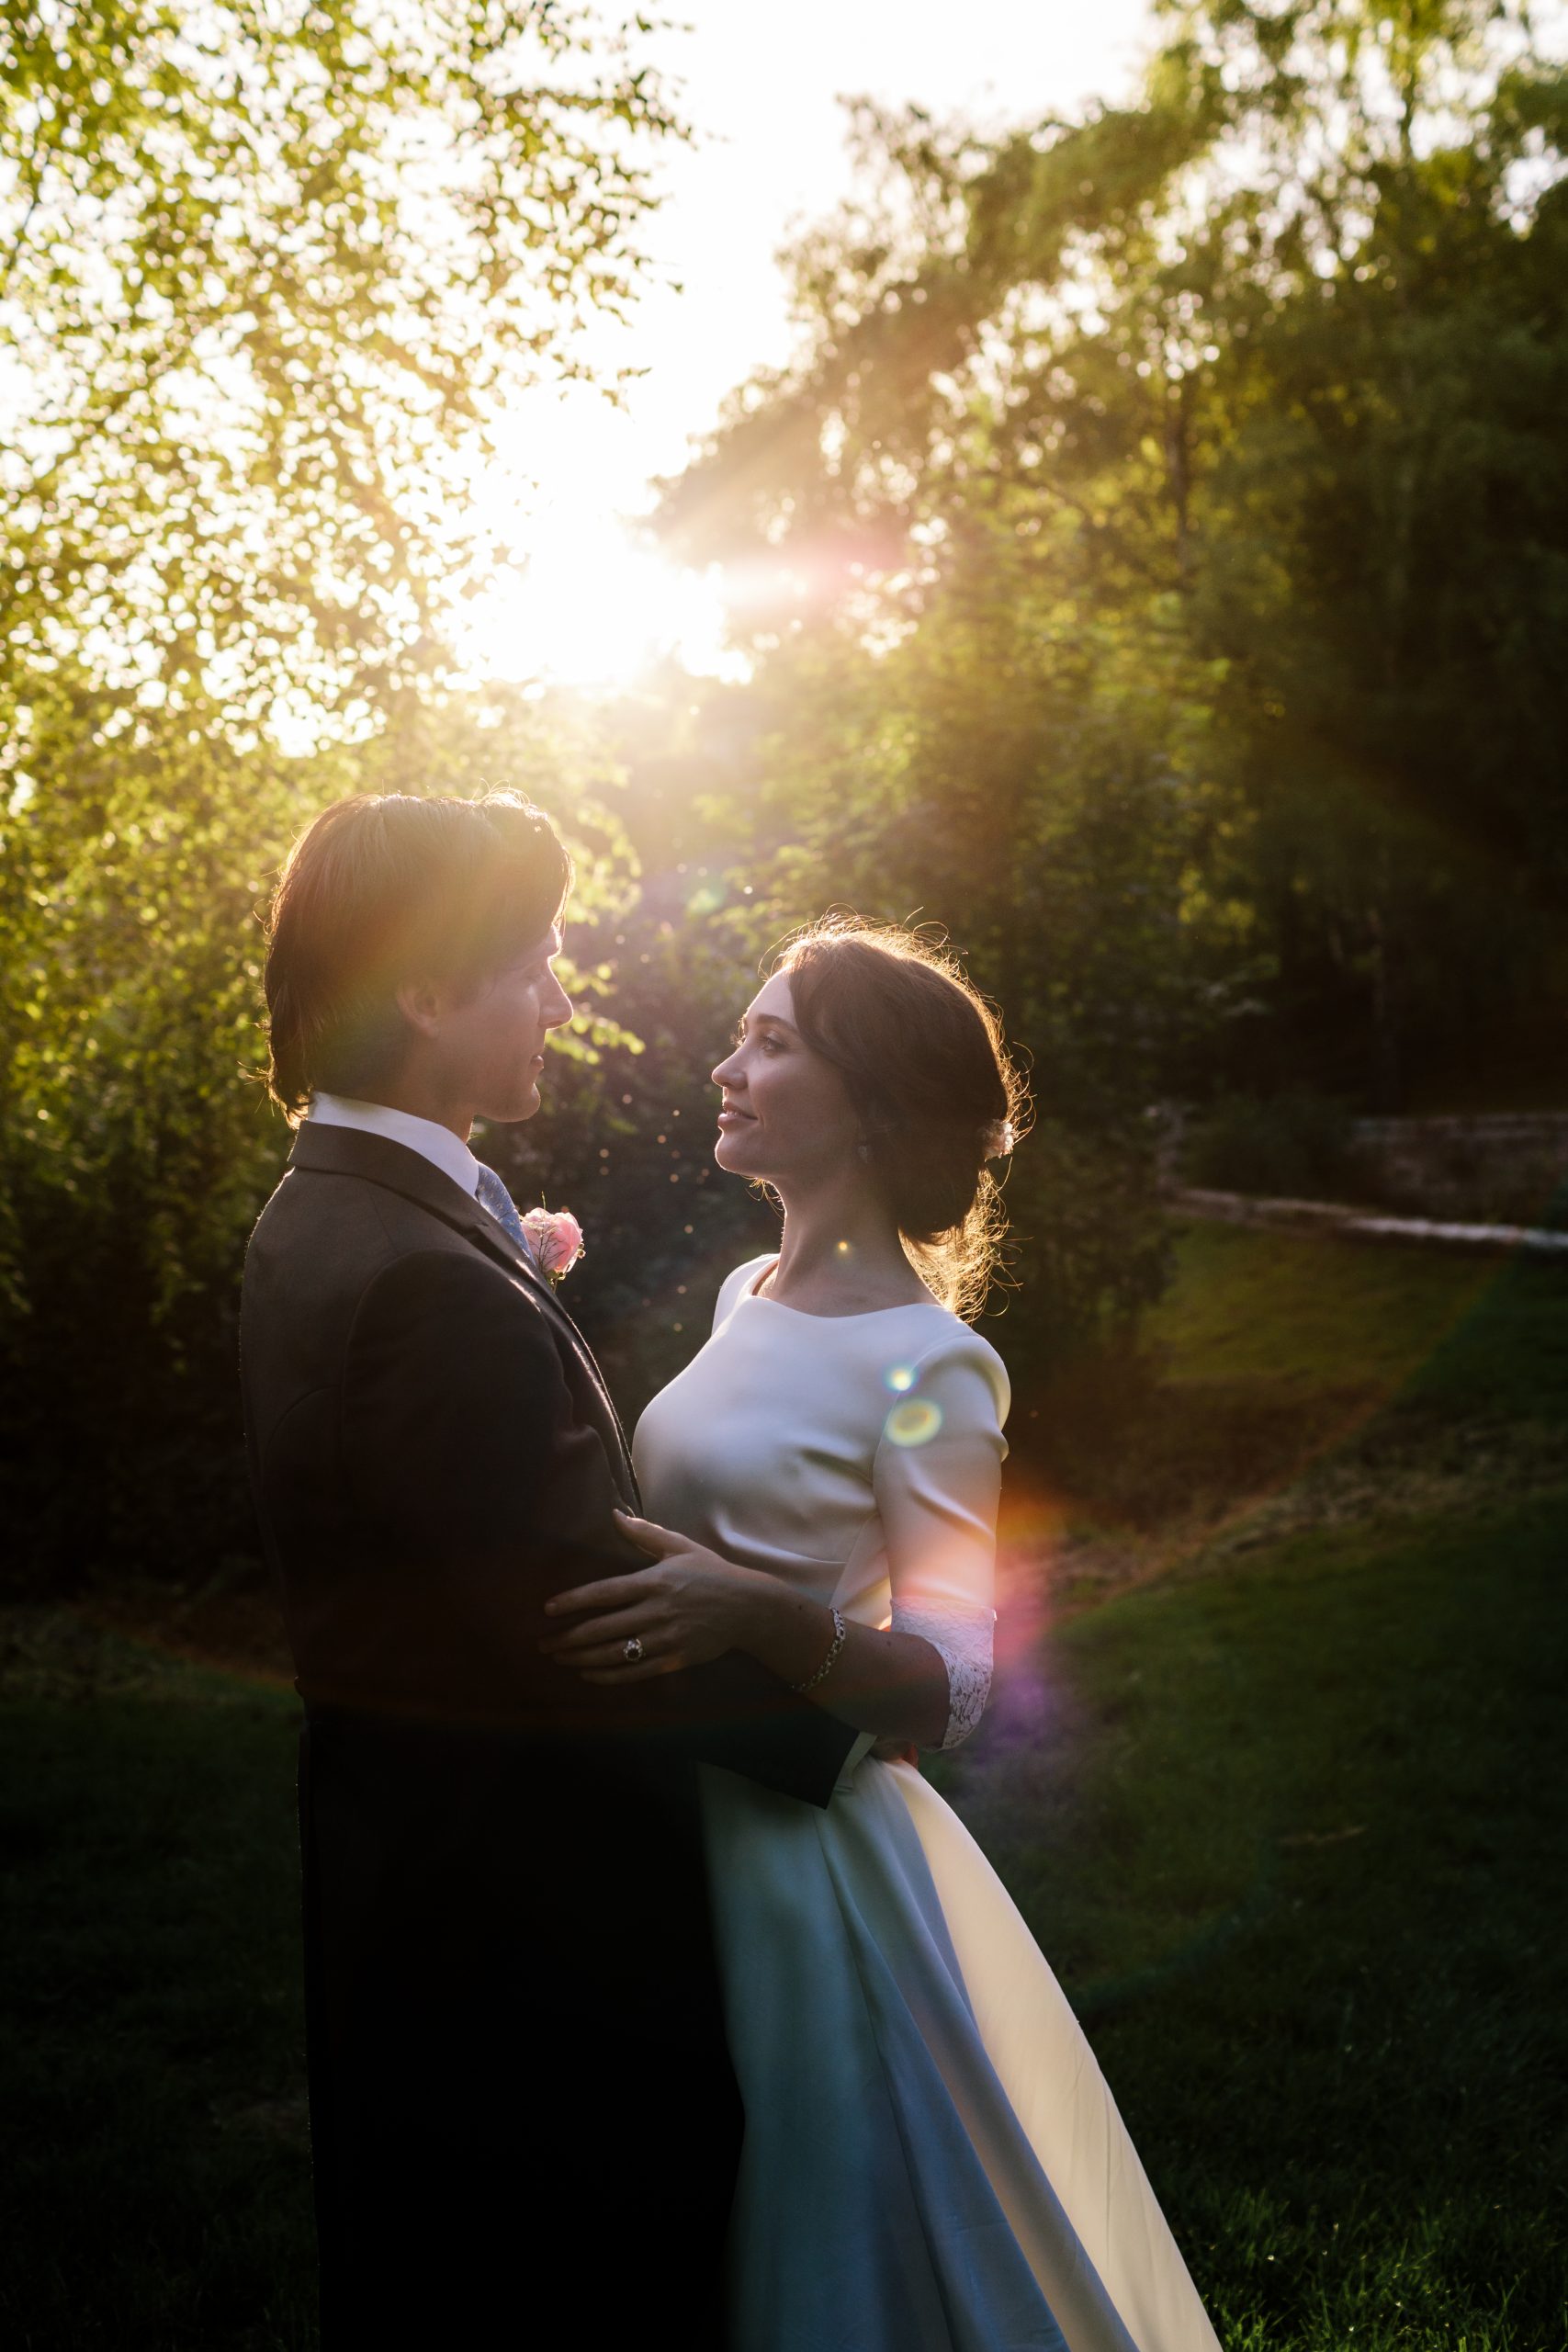 French wedding at Owlpen Manor, bride is being held by groom in the evening golden sunlight